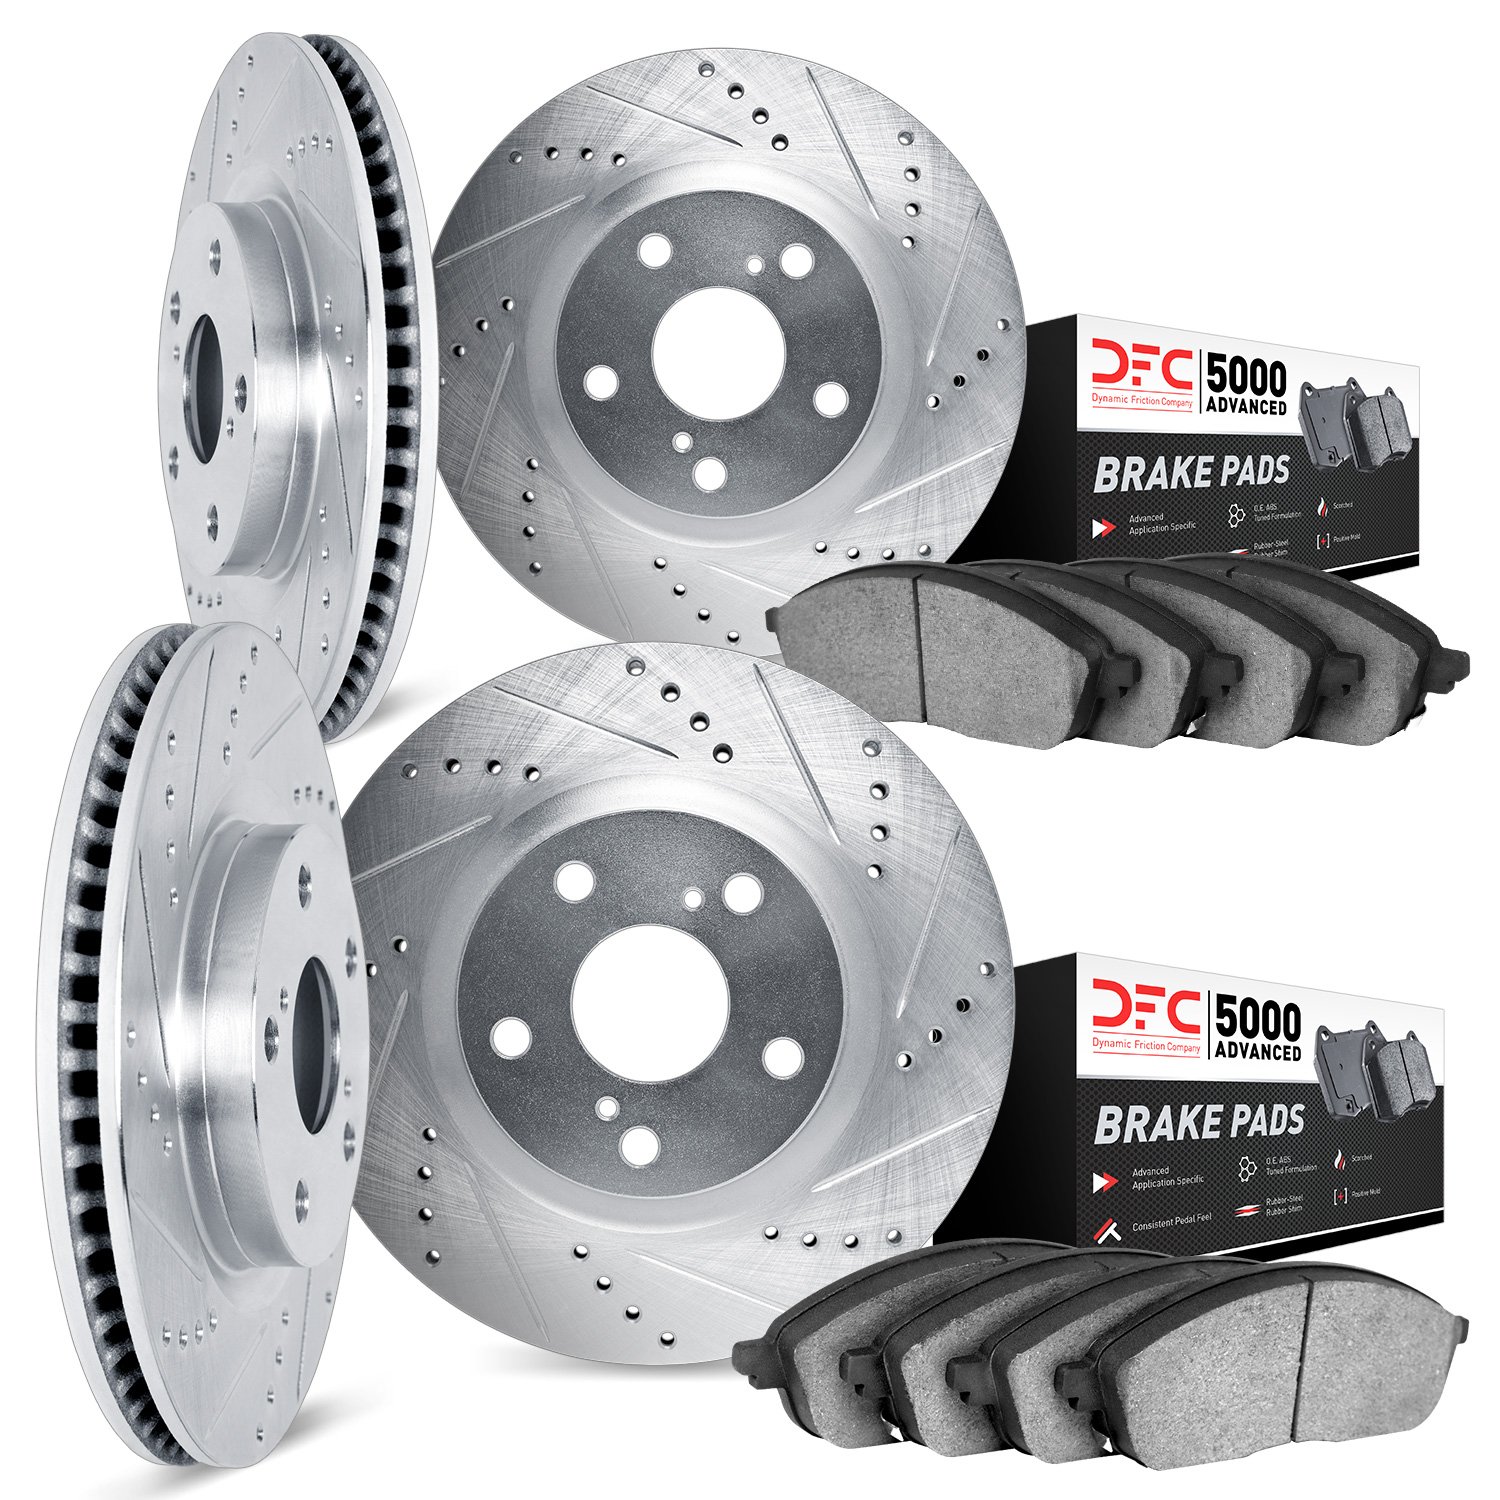 7504-31043 Drilled/Slotted Brake Rotors w/5000 Advanced Brake Pads Kit [Silver], 2011-2016 BMW, Position: Front and Rear